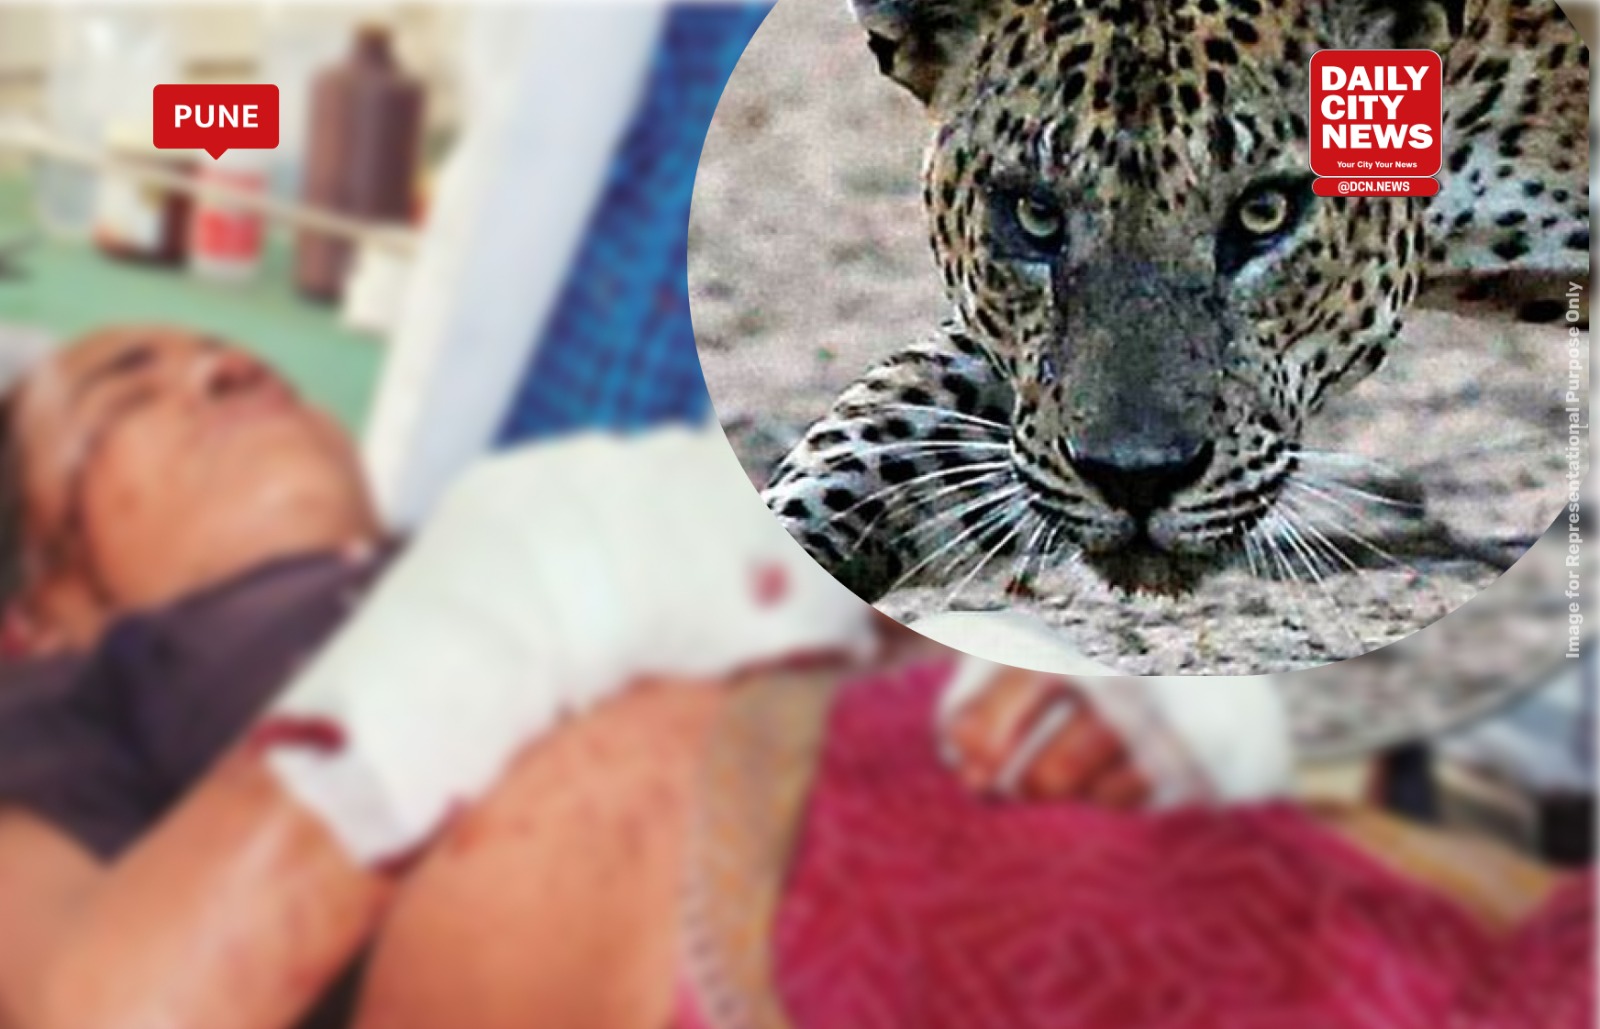 Woman dies after being attacked by leopard